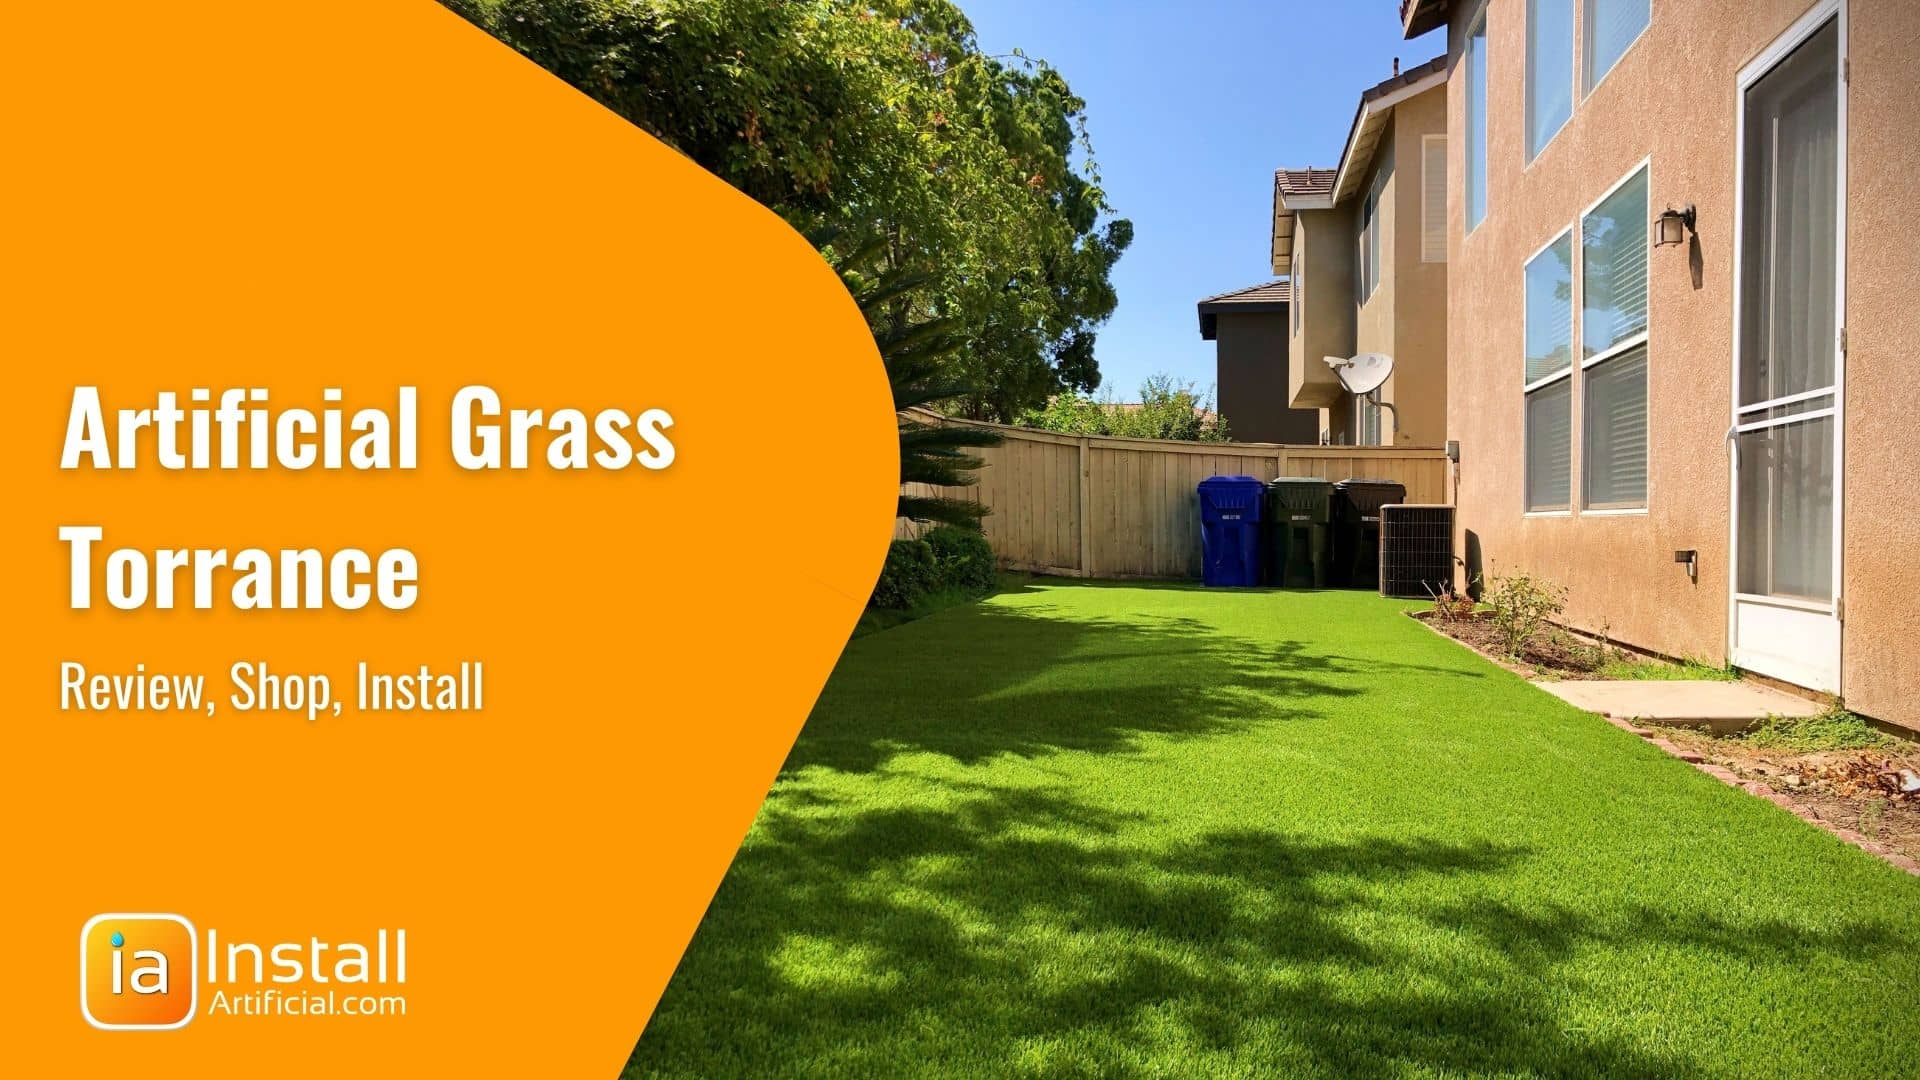 What's the Price of Artificial Grass in Torrance?